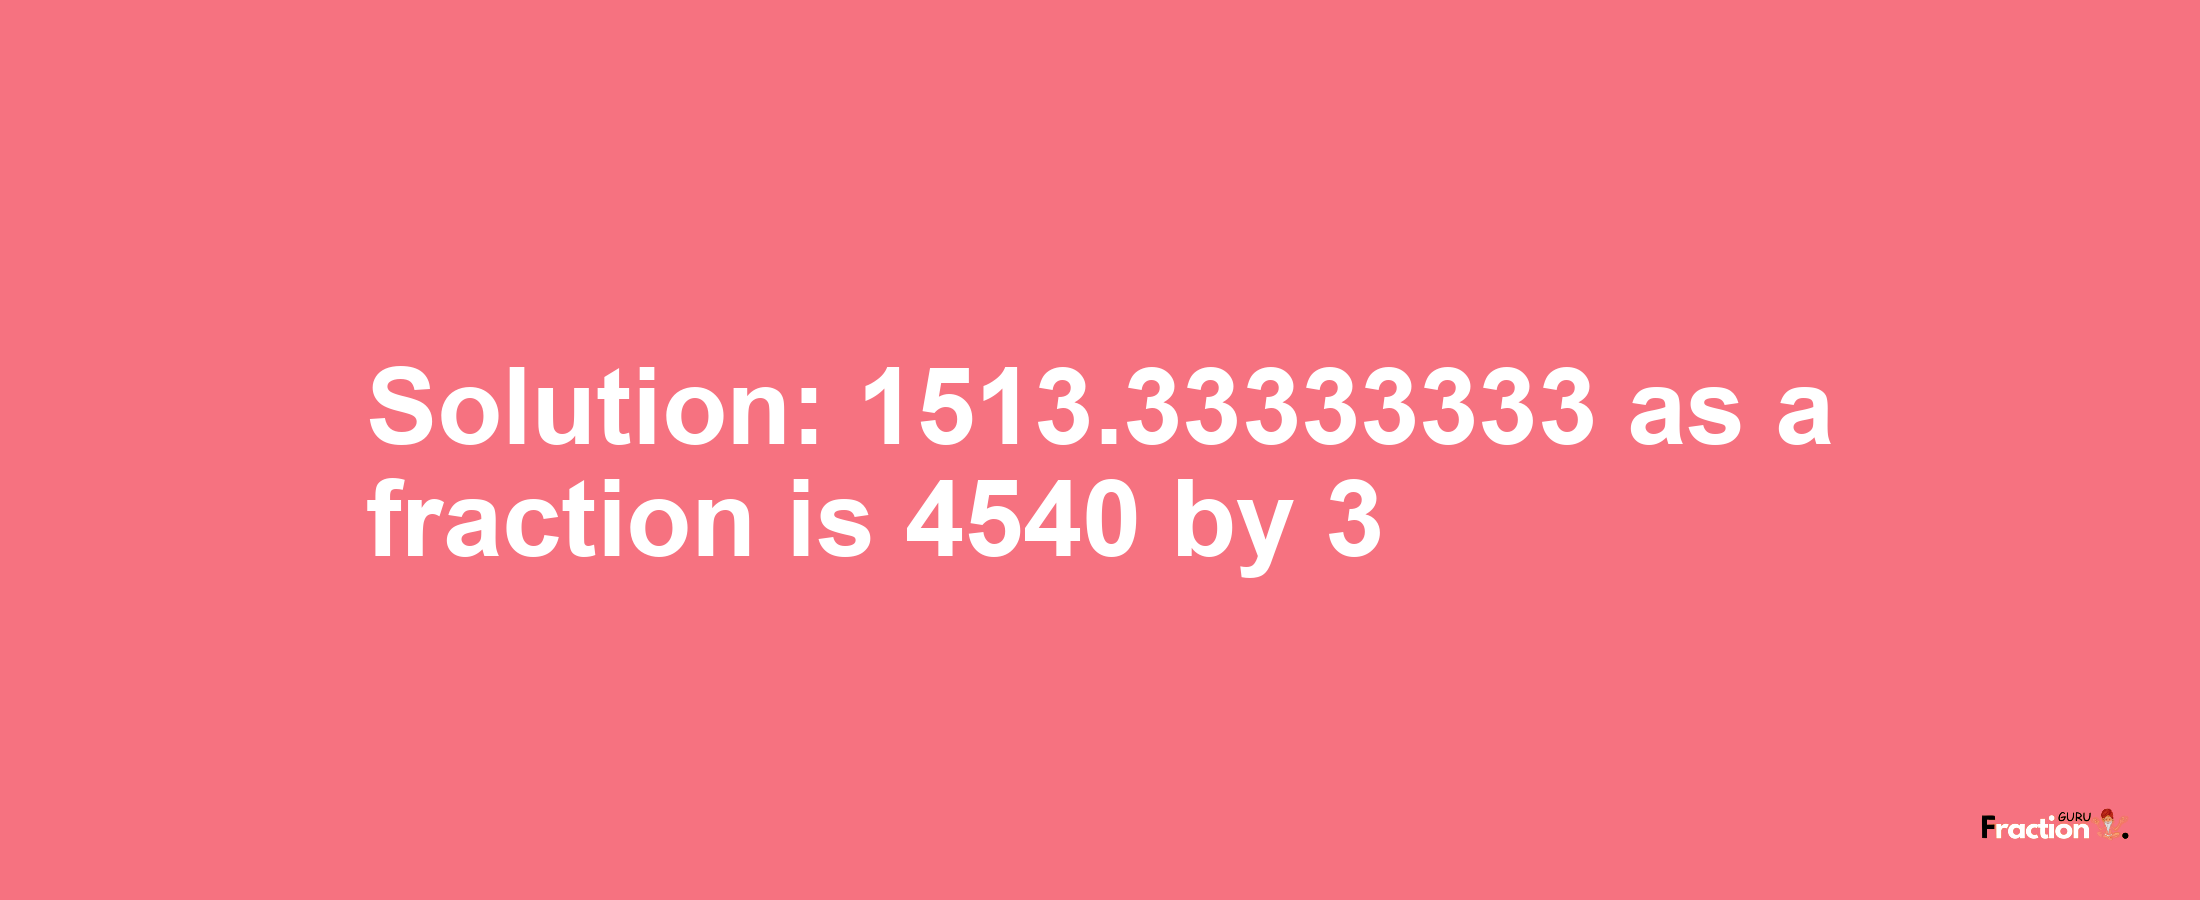 Solution:1513.33333333 as a fraction is 4540/3